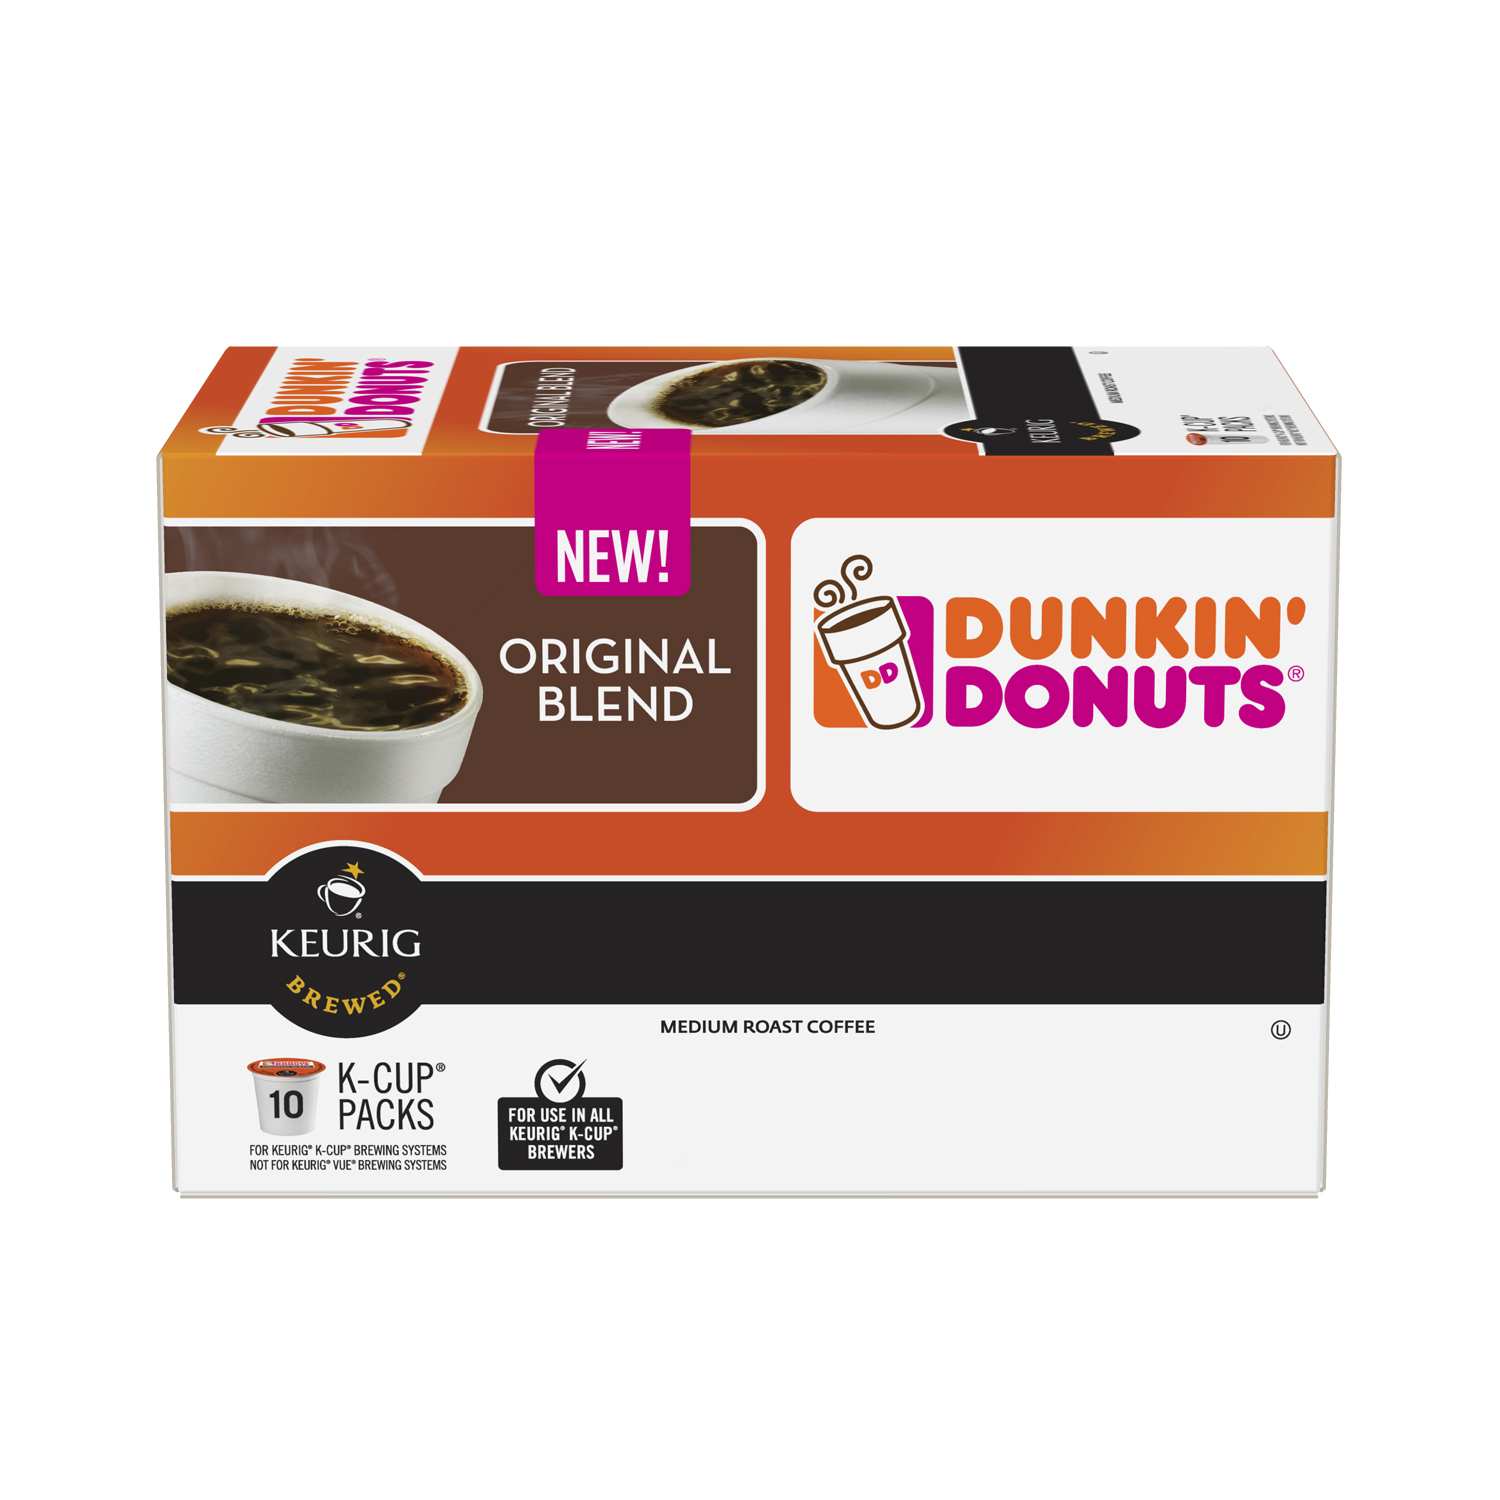 Dunkin’ Donuts Shareholders Want Company To Look Into K-Cup Waste